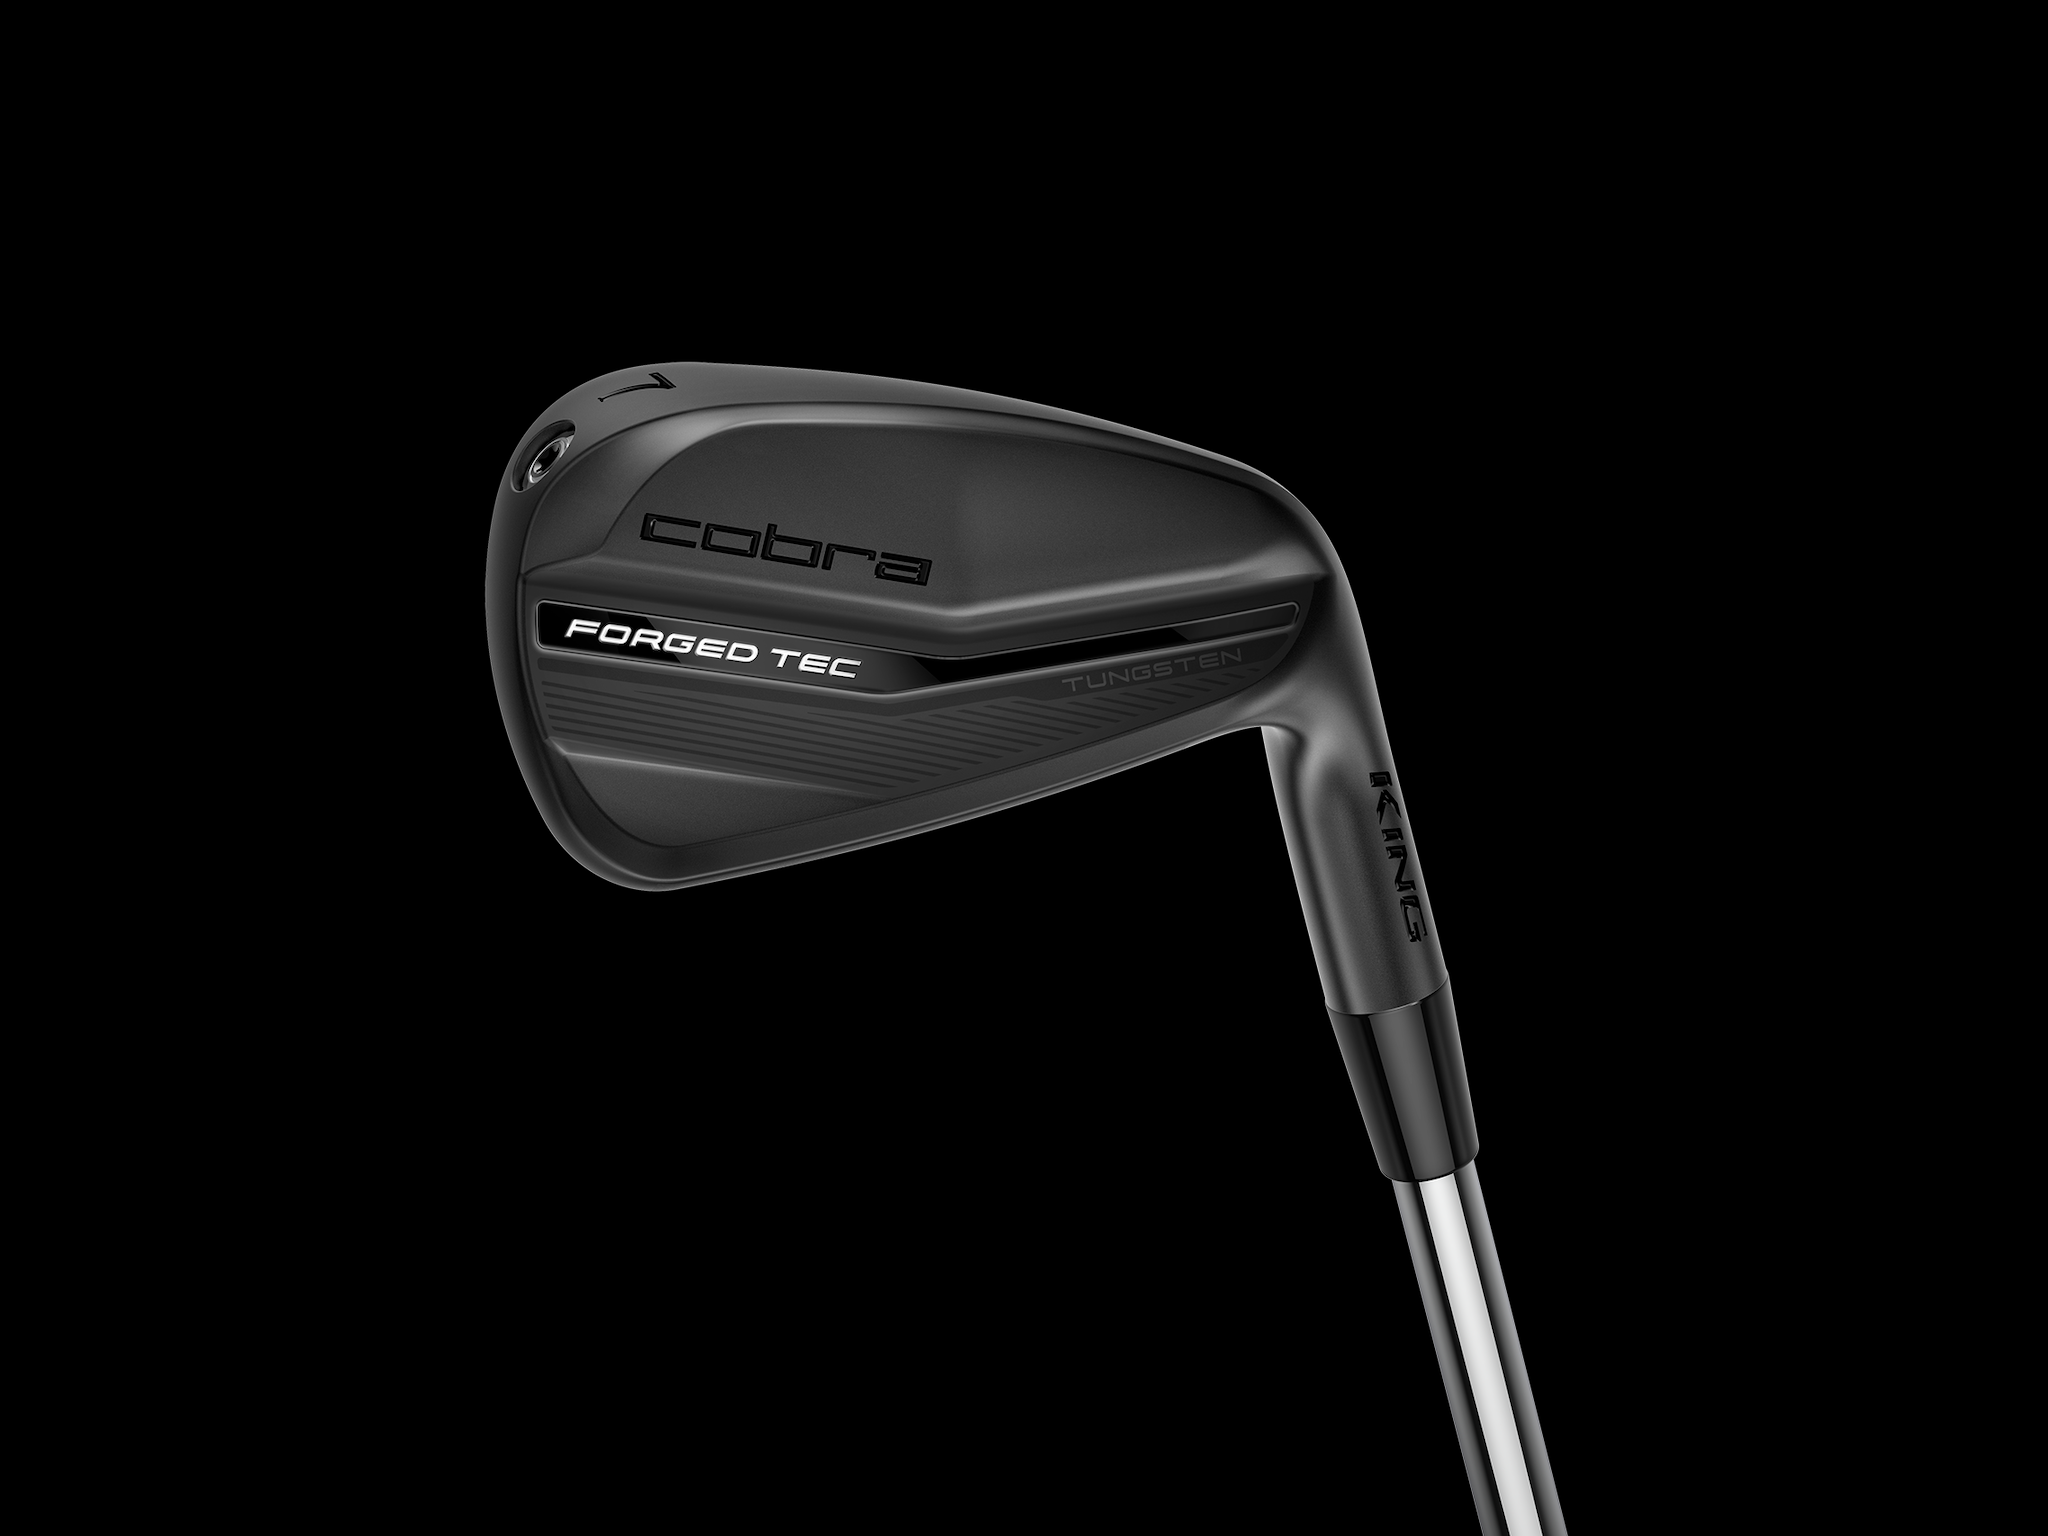 Cobra Golf launches limited-edition King Forged TEC Black irons